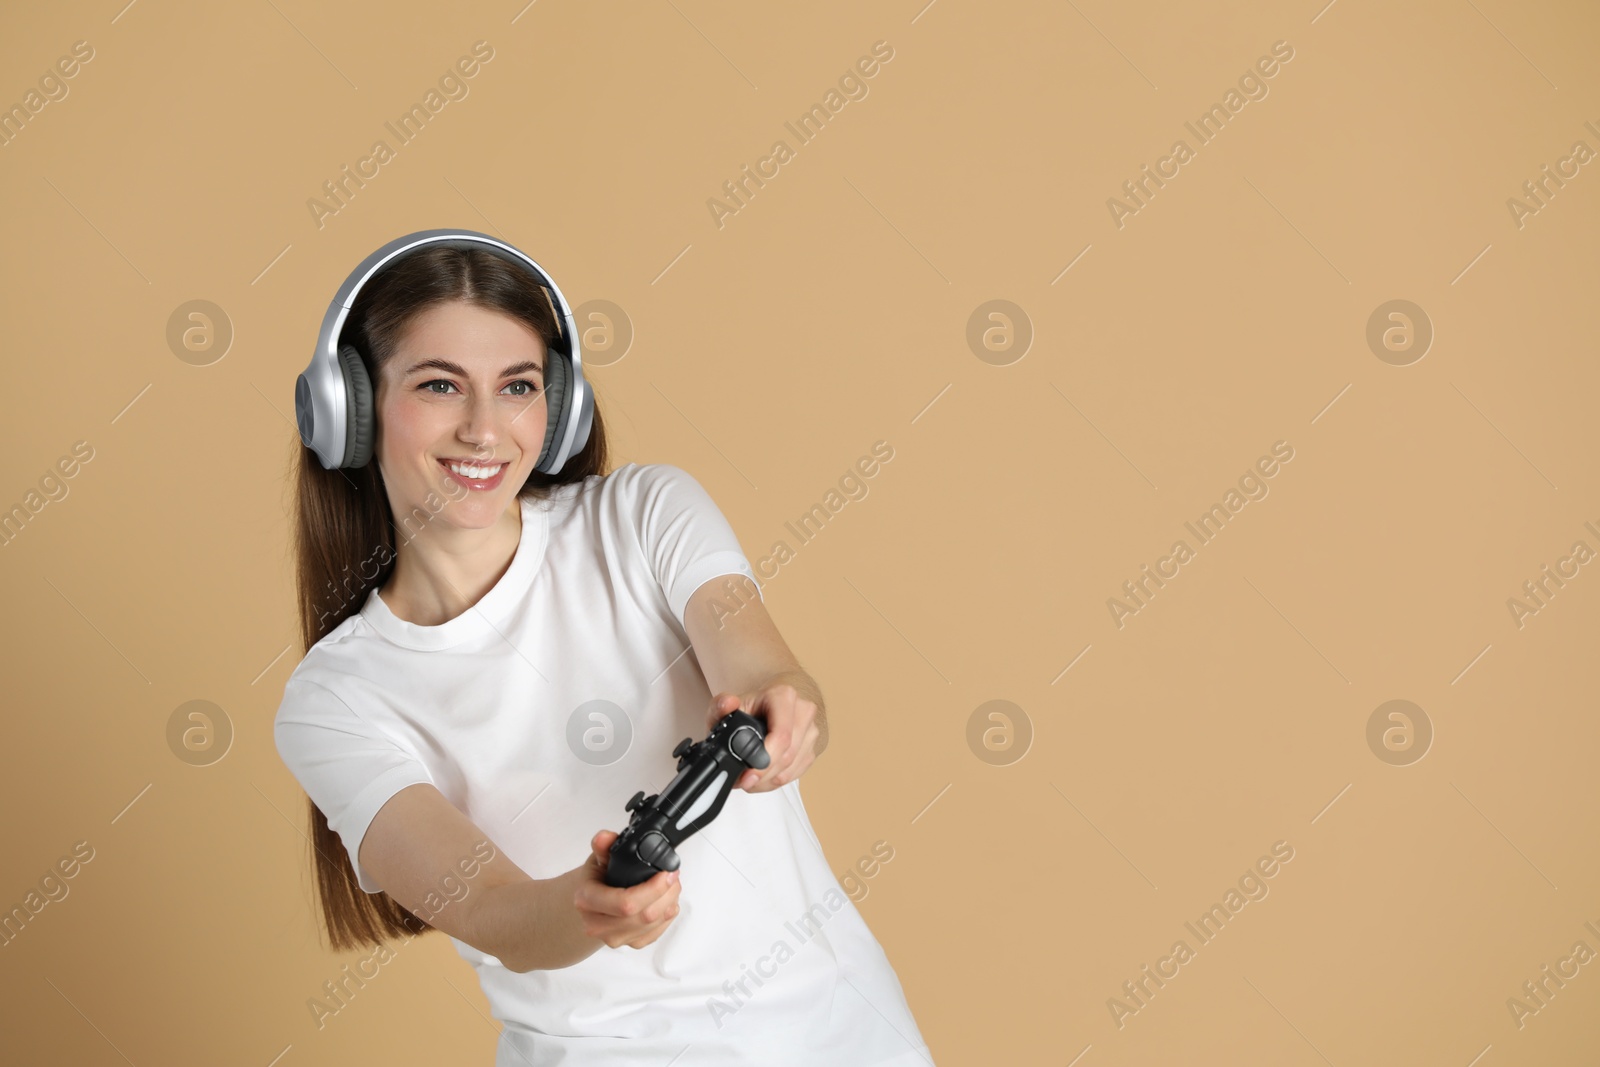 Photo of Happy woman in headphones playing video games with controller on beige background, space for text